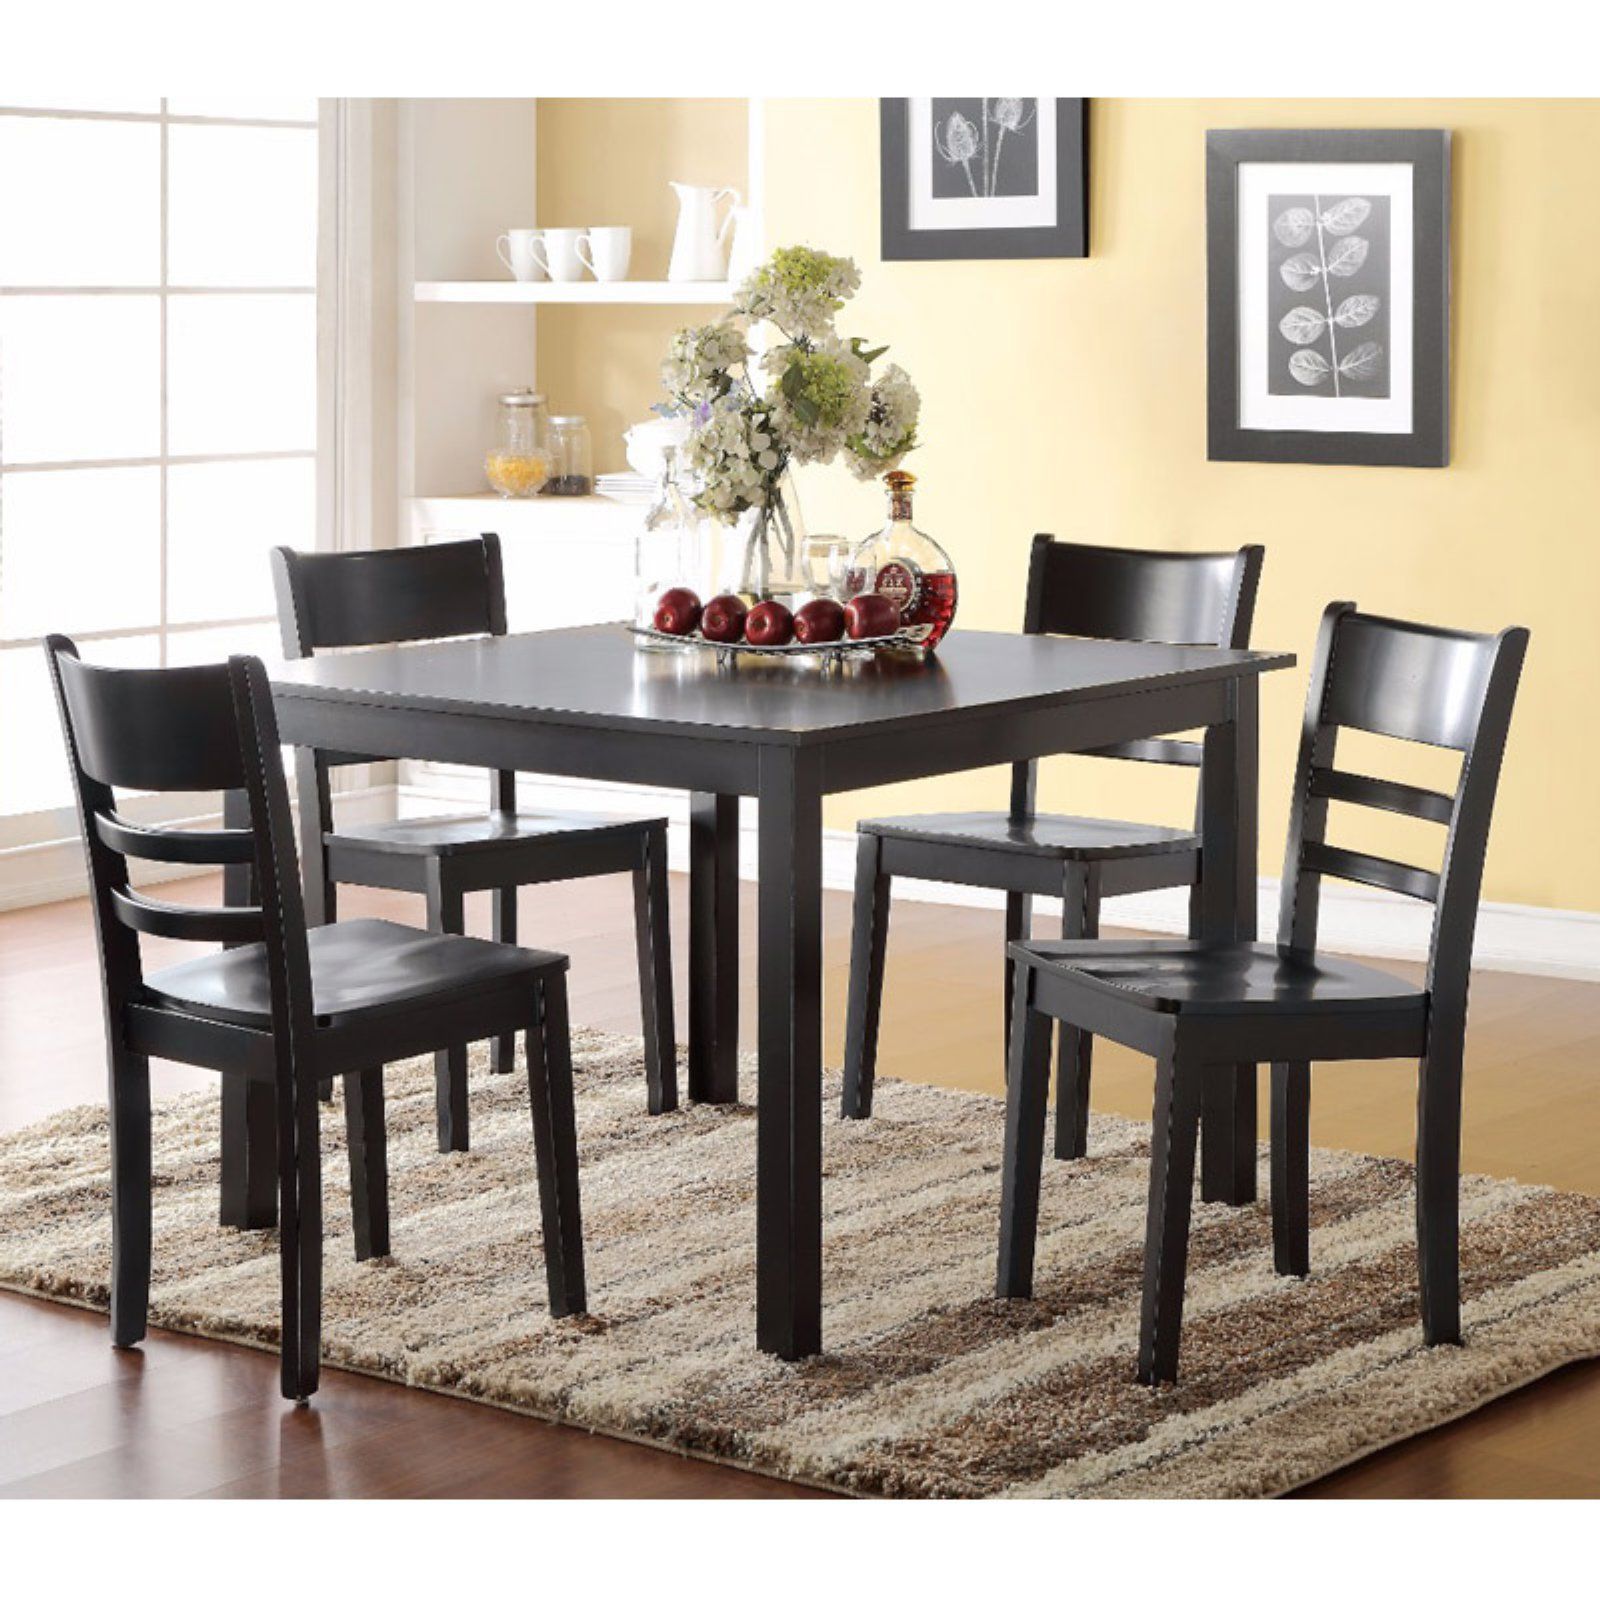 Transitional 4 Seating Square Casual Dining Tables Within Most Current Benzara Gracious 5 Piece Square Dining Table Set In  (View 6 of 25)